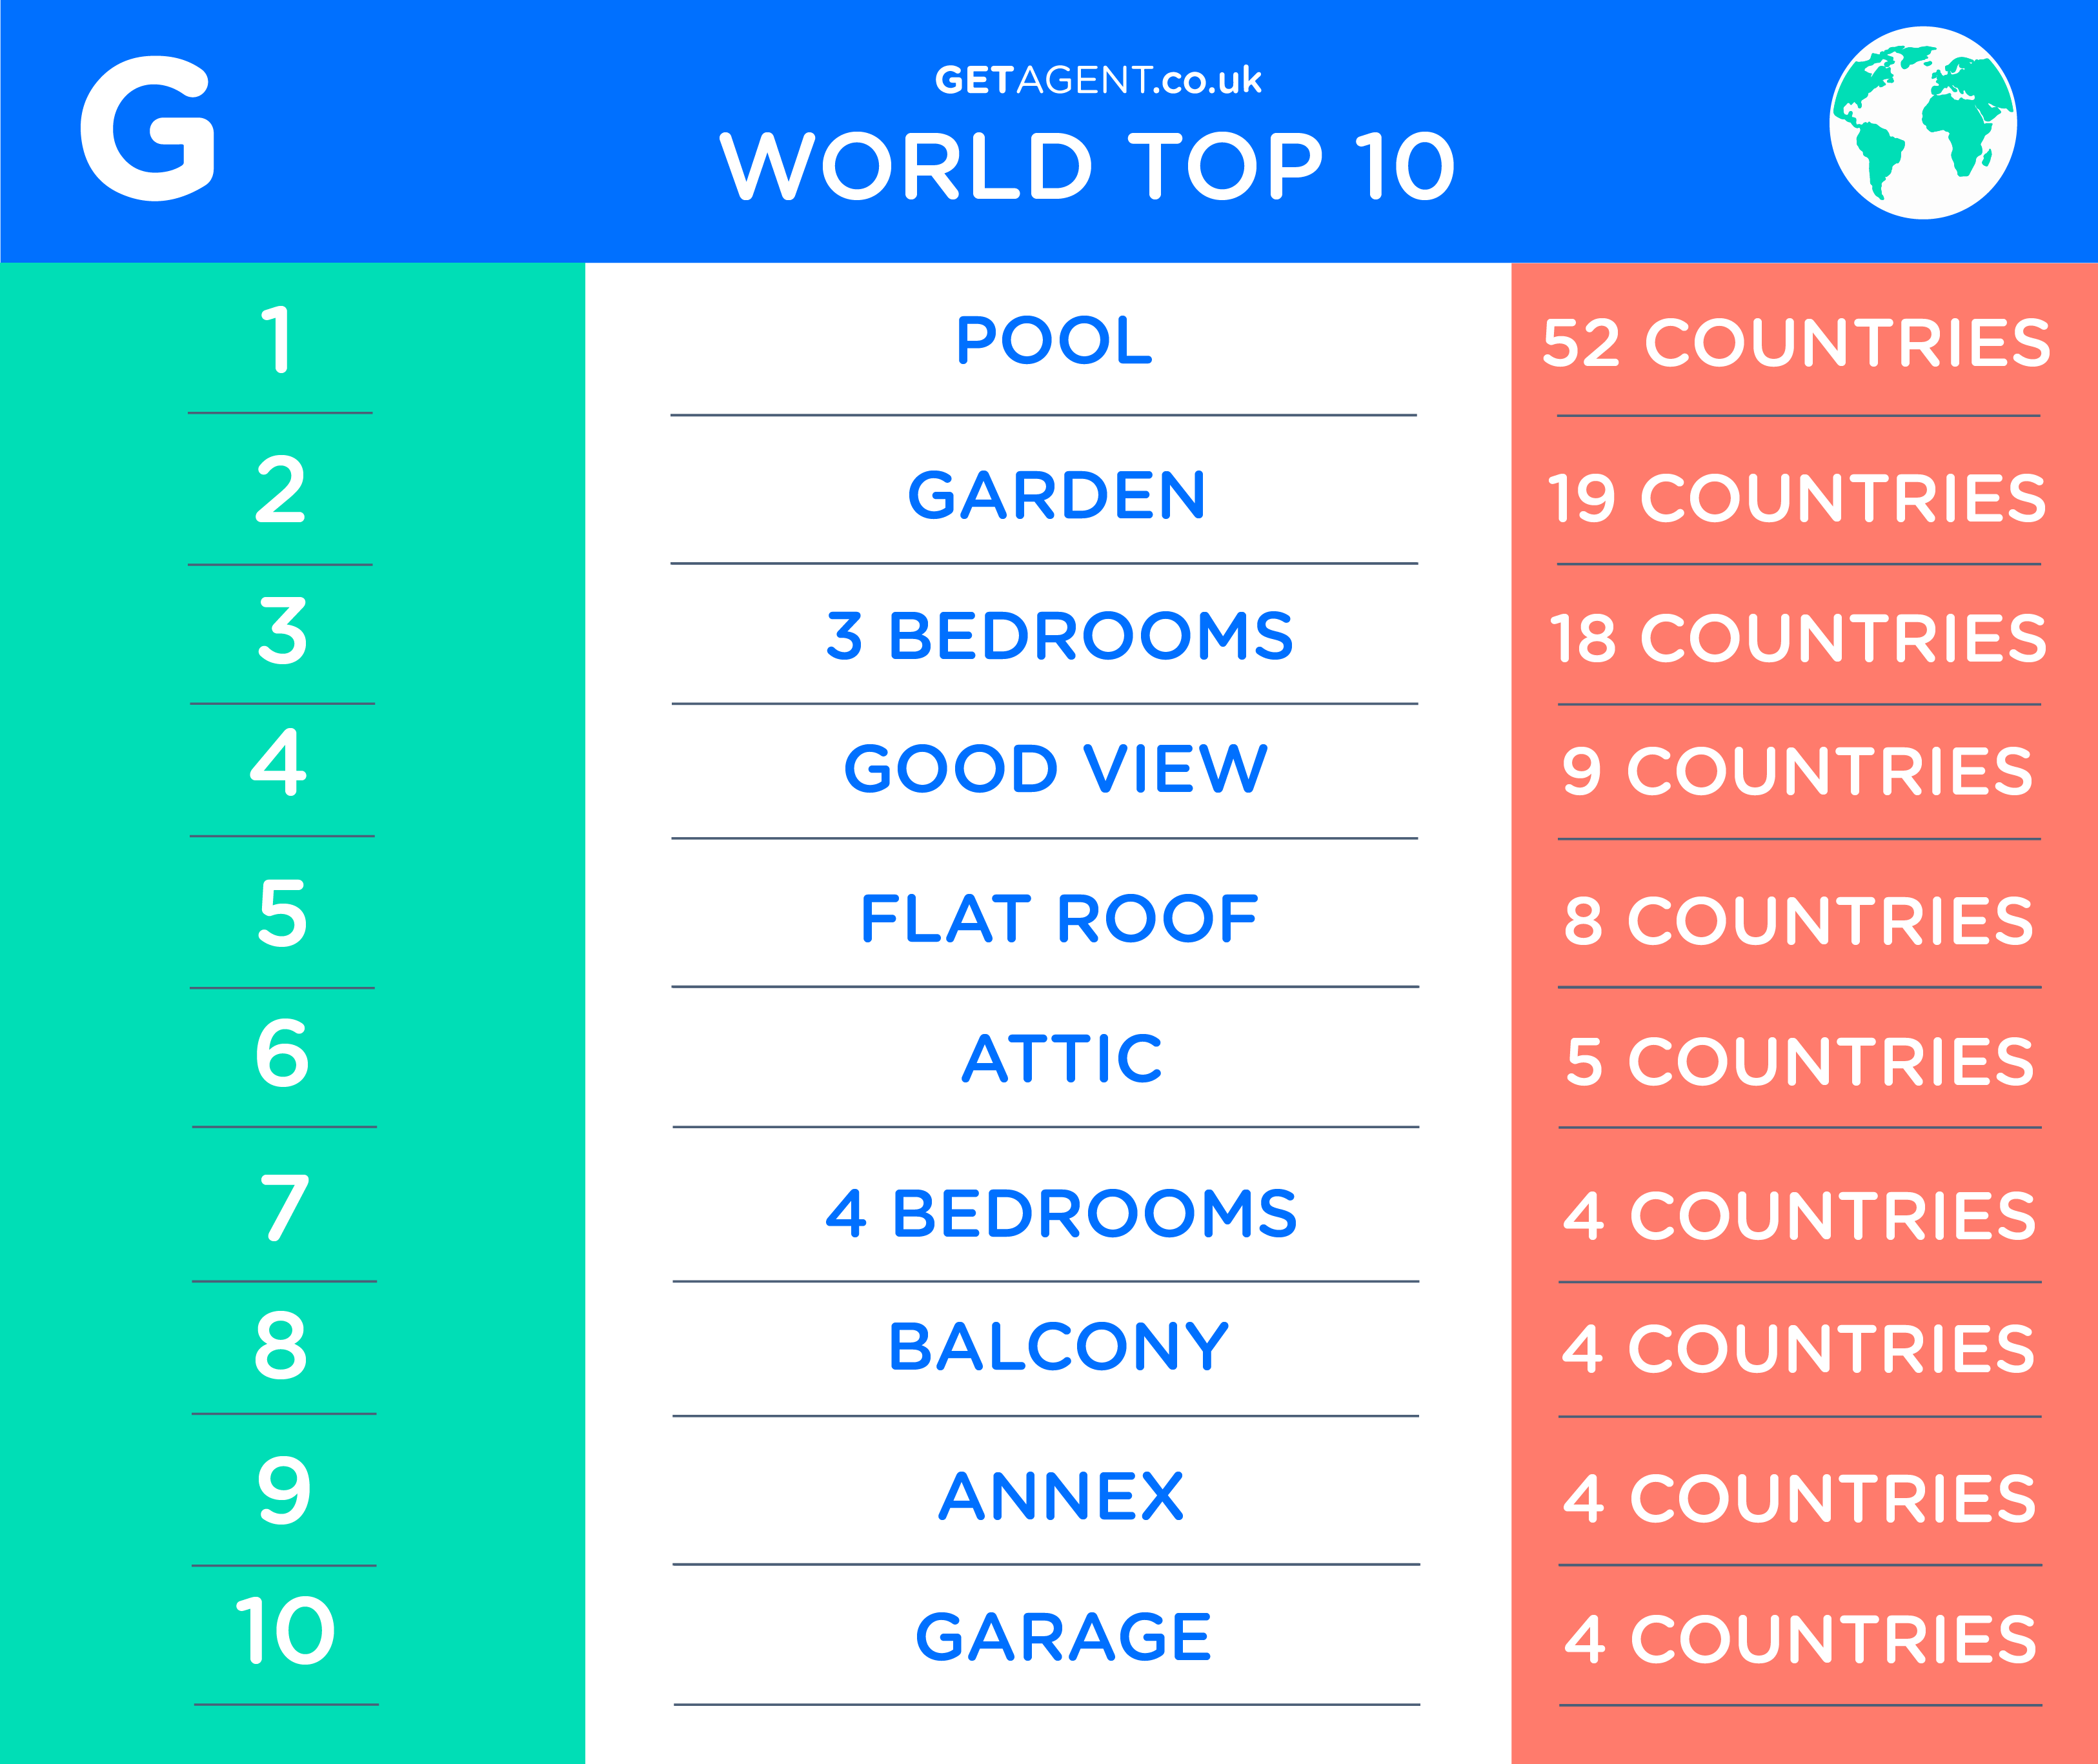 Most popular home feature in the world Top 10